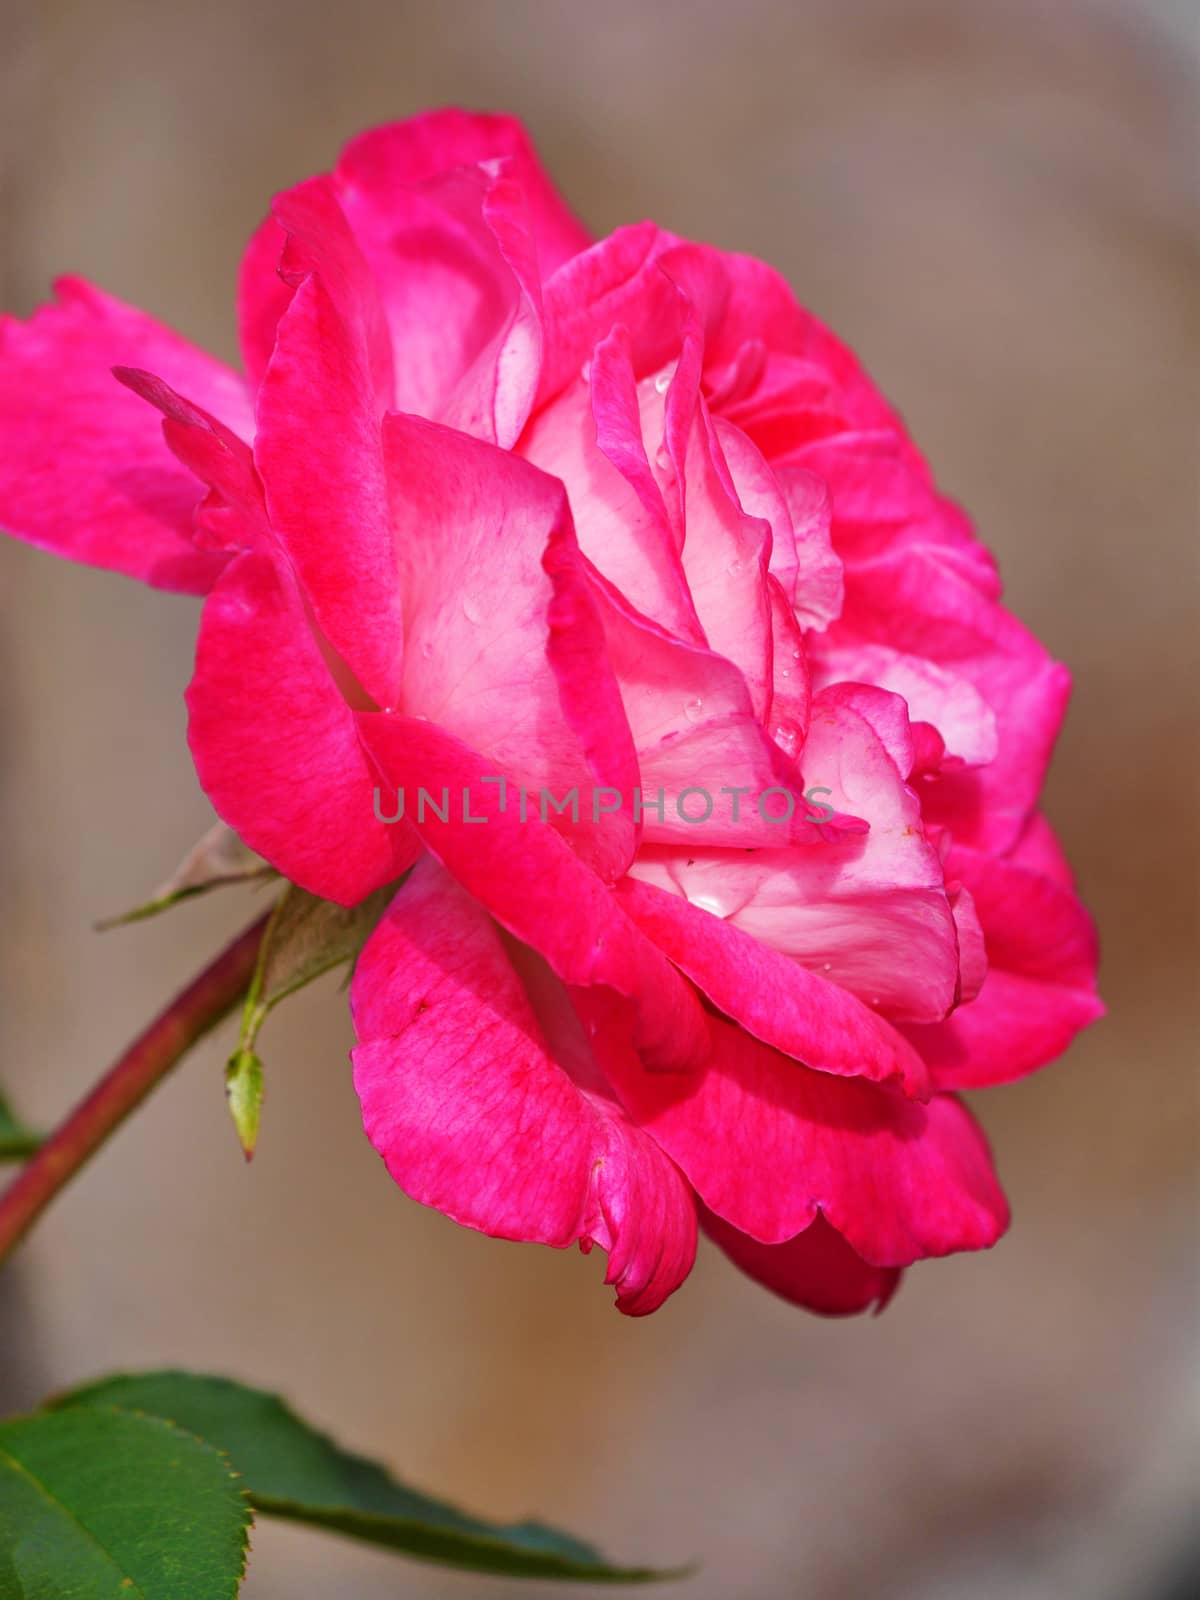 fresh rose with white base of petals and pink veins by Adamchuk